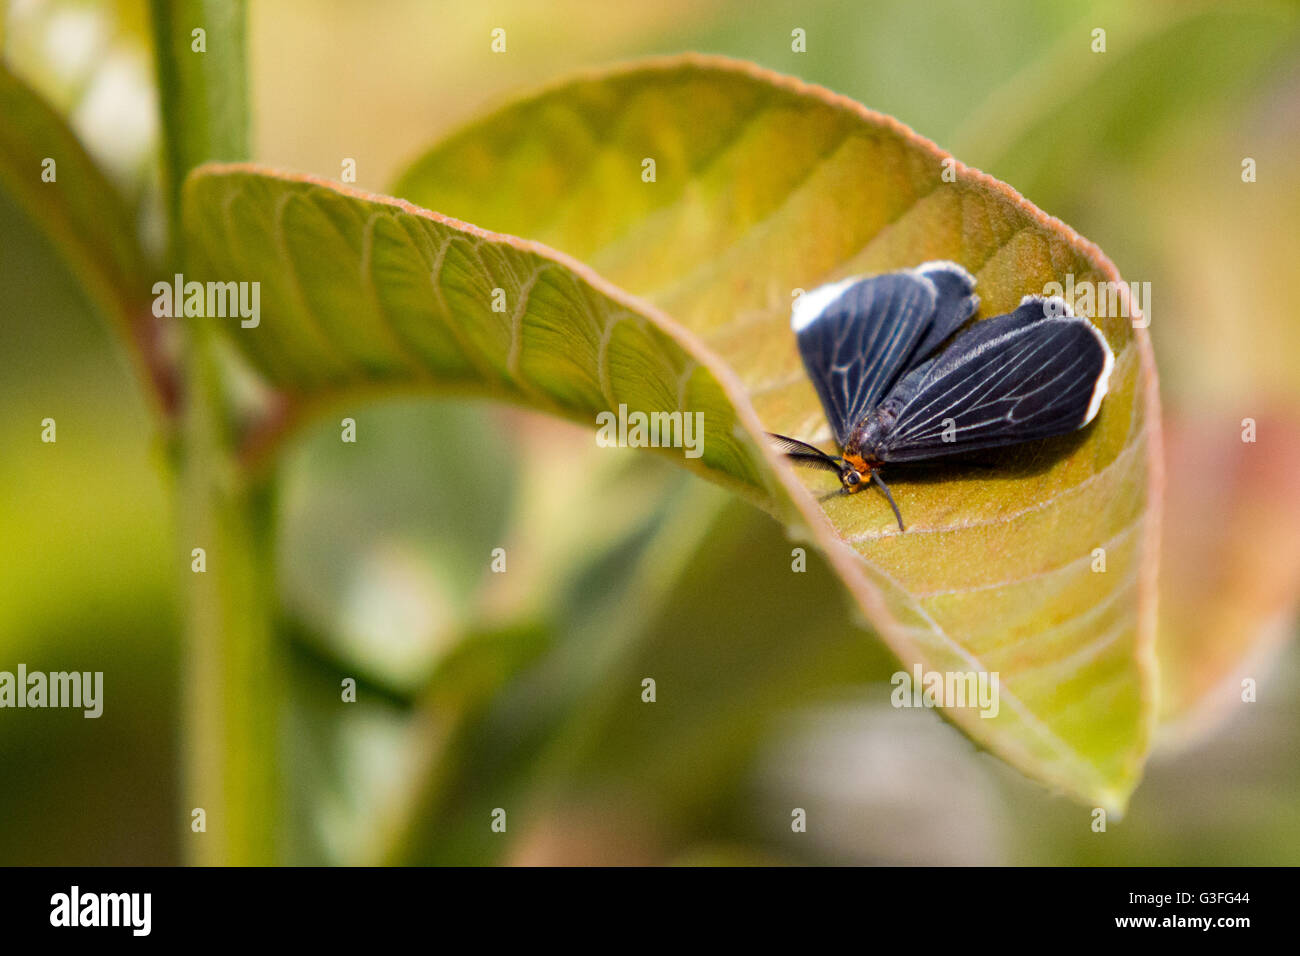 Asuncion, Paraguay. 10th June, 2016. White-tipped black or snowbush spanworm (Melanchroia chephise) moth, rests on guava tree leaf, is seen during sunny day in Asuncion, Paraguay. Credit: Andre M. Chang/Alamy Live News Stock Photo